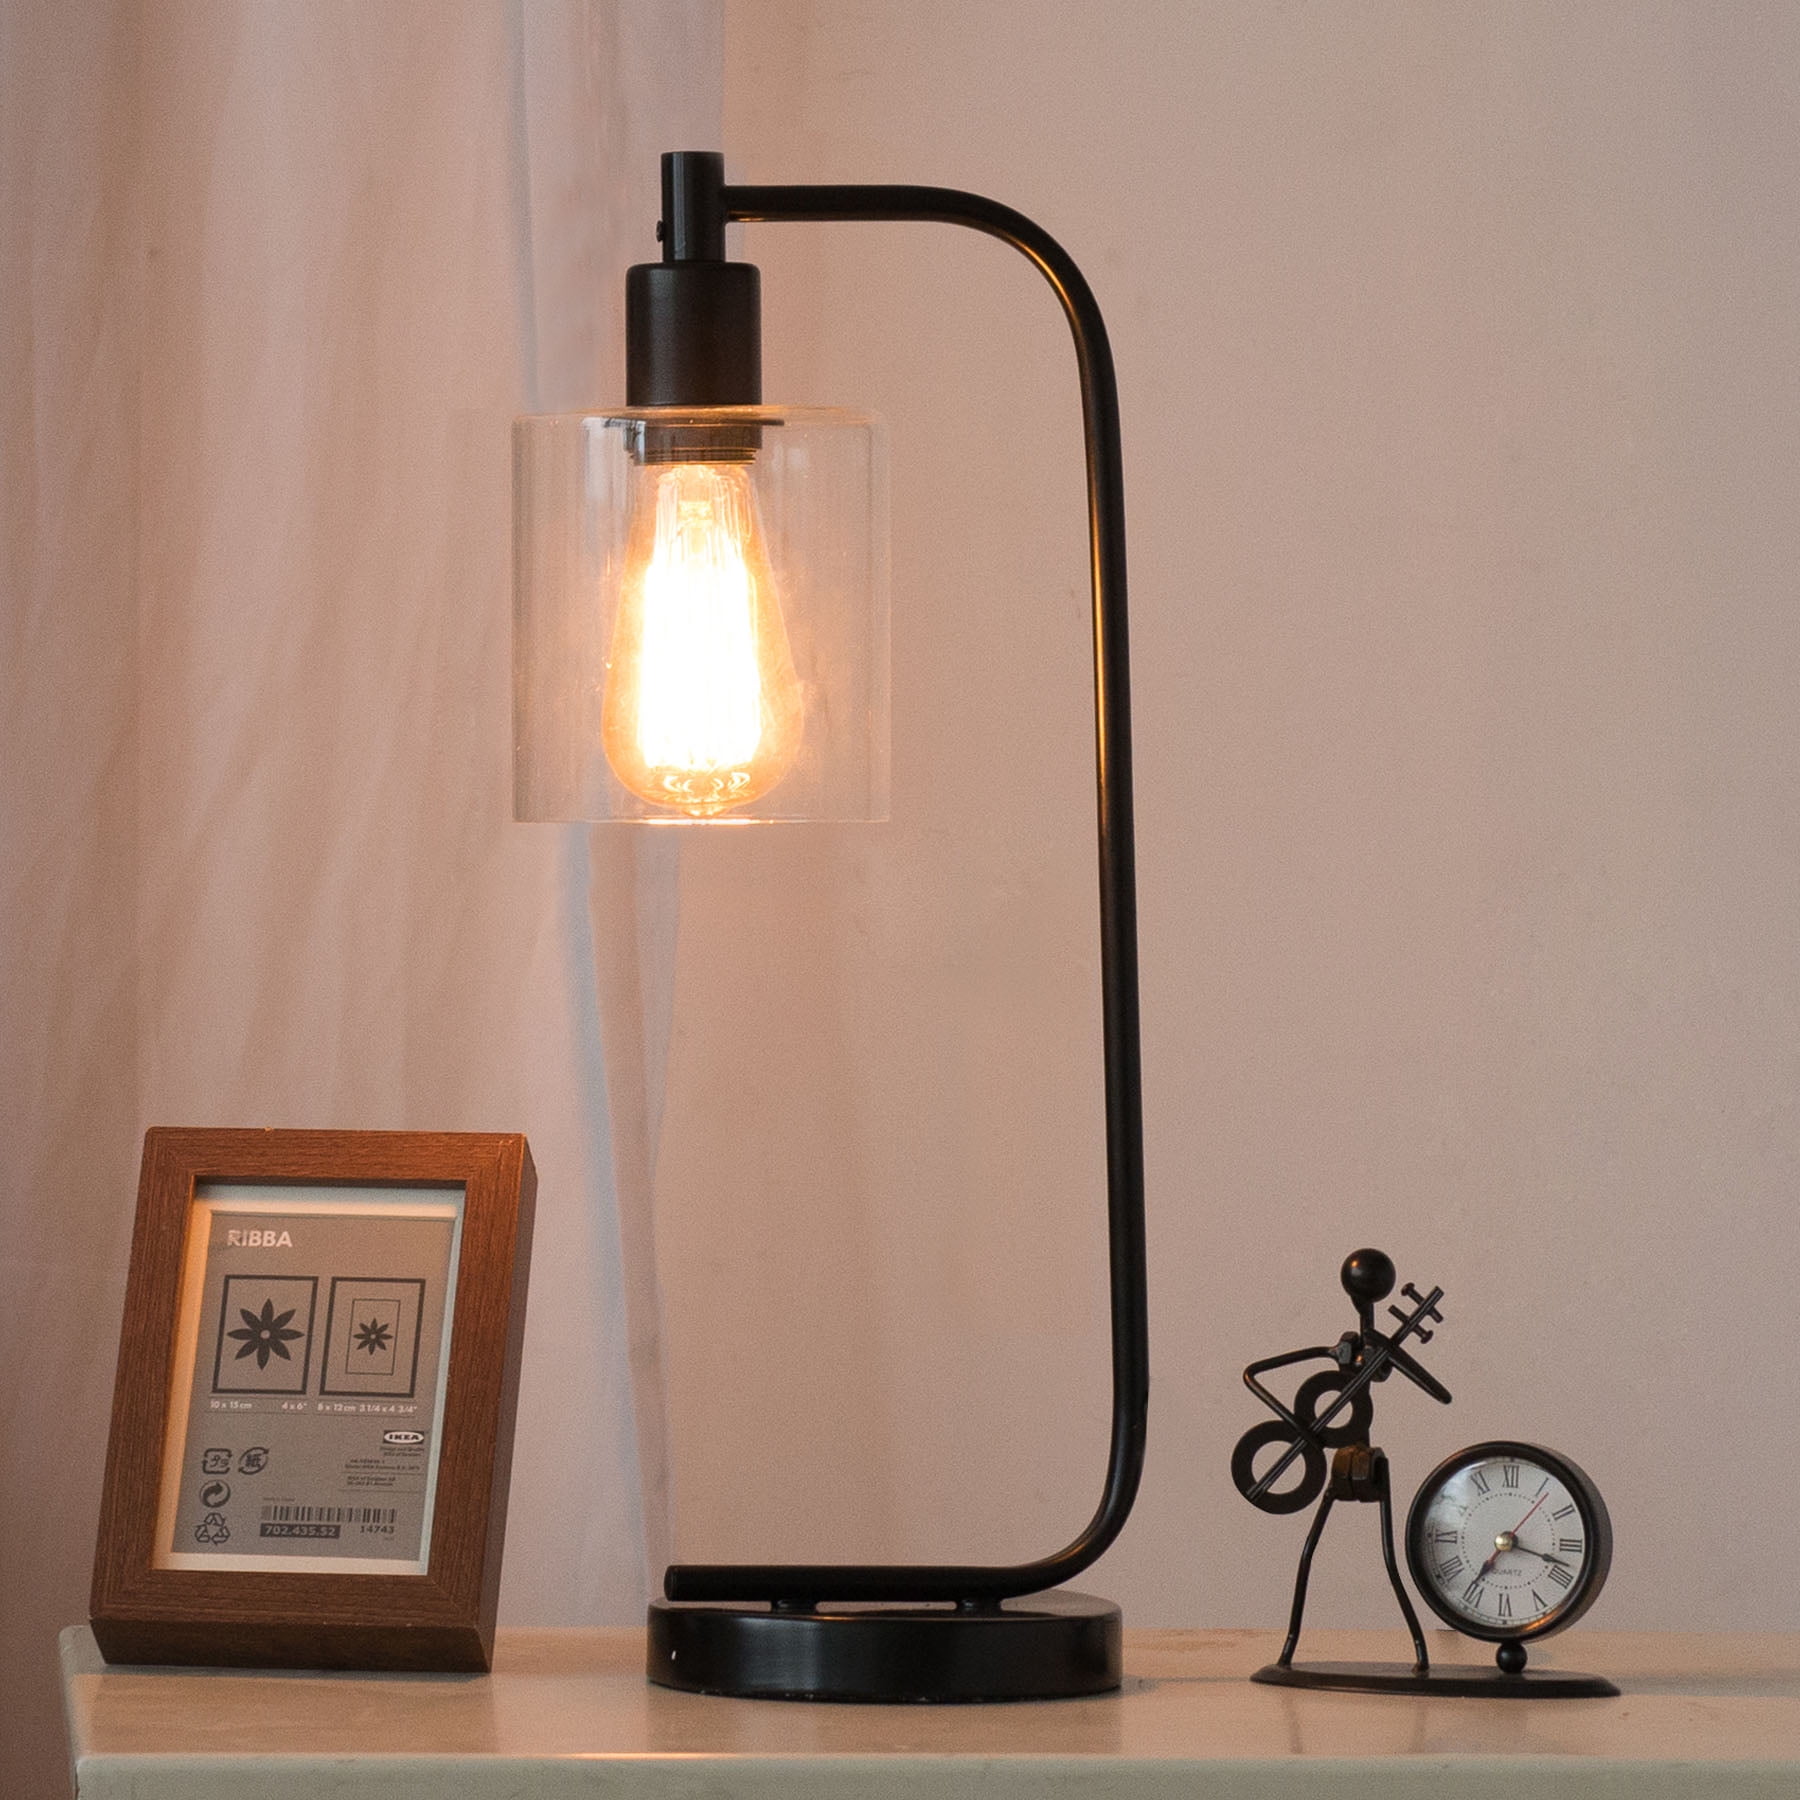 Decorative Lamp, Portable Antique Style Industrial Desk Lamp with Clear